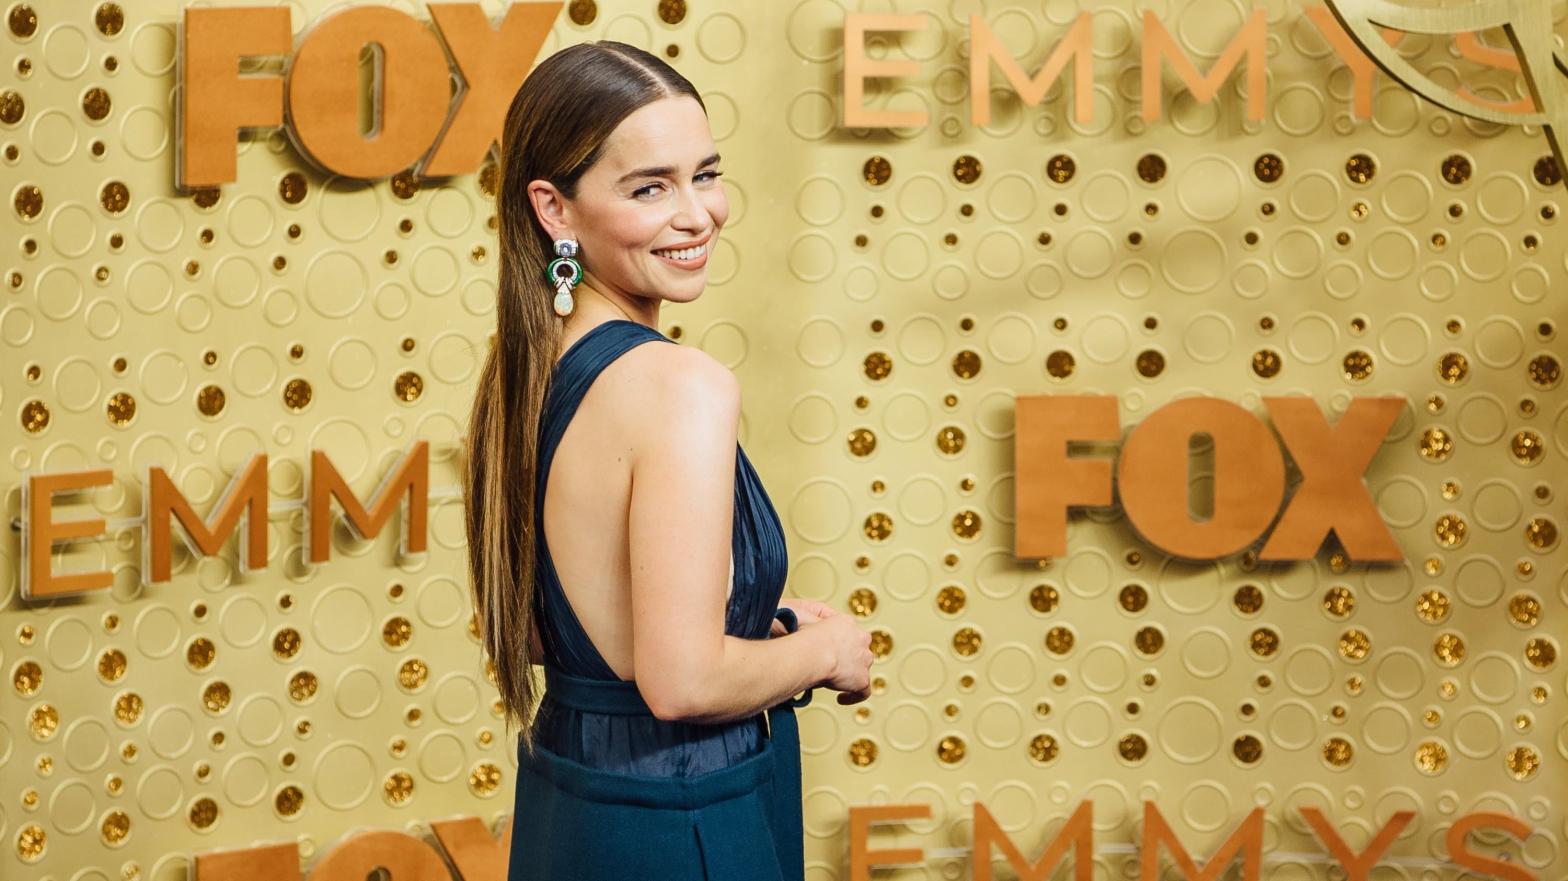 Emilia Clarke arrives at the 71st Emmy Awards on September 22, 2019 in Los Angeles, California. (Photo: Emma McIntyre, Getty Images)